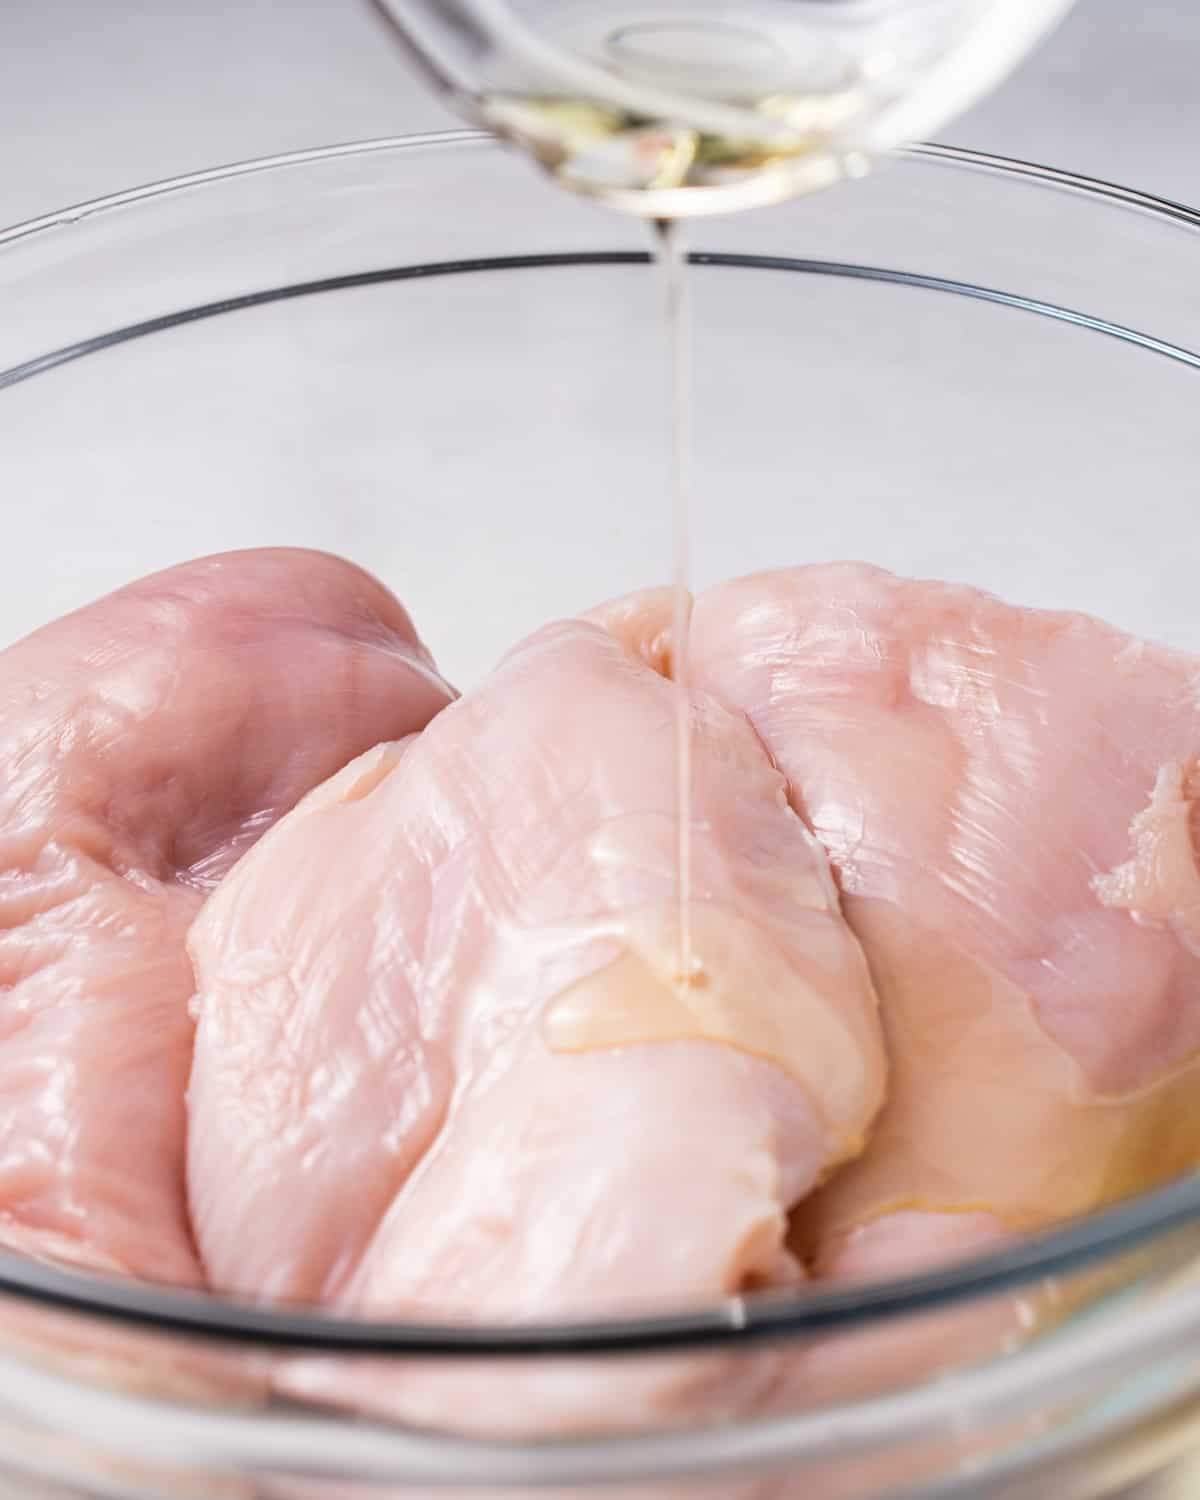 Drizzling olive oil on chicken breast.